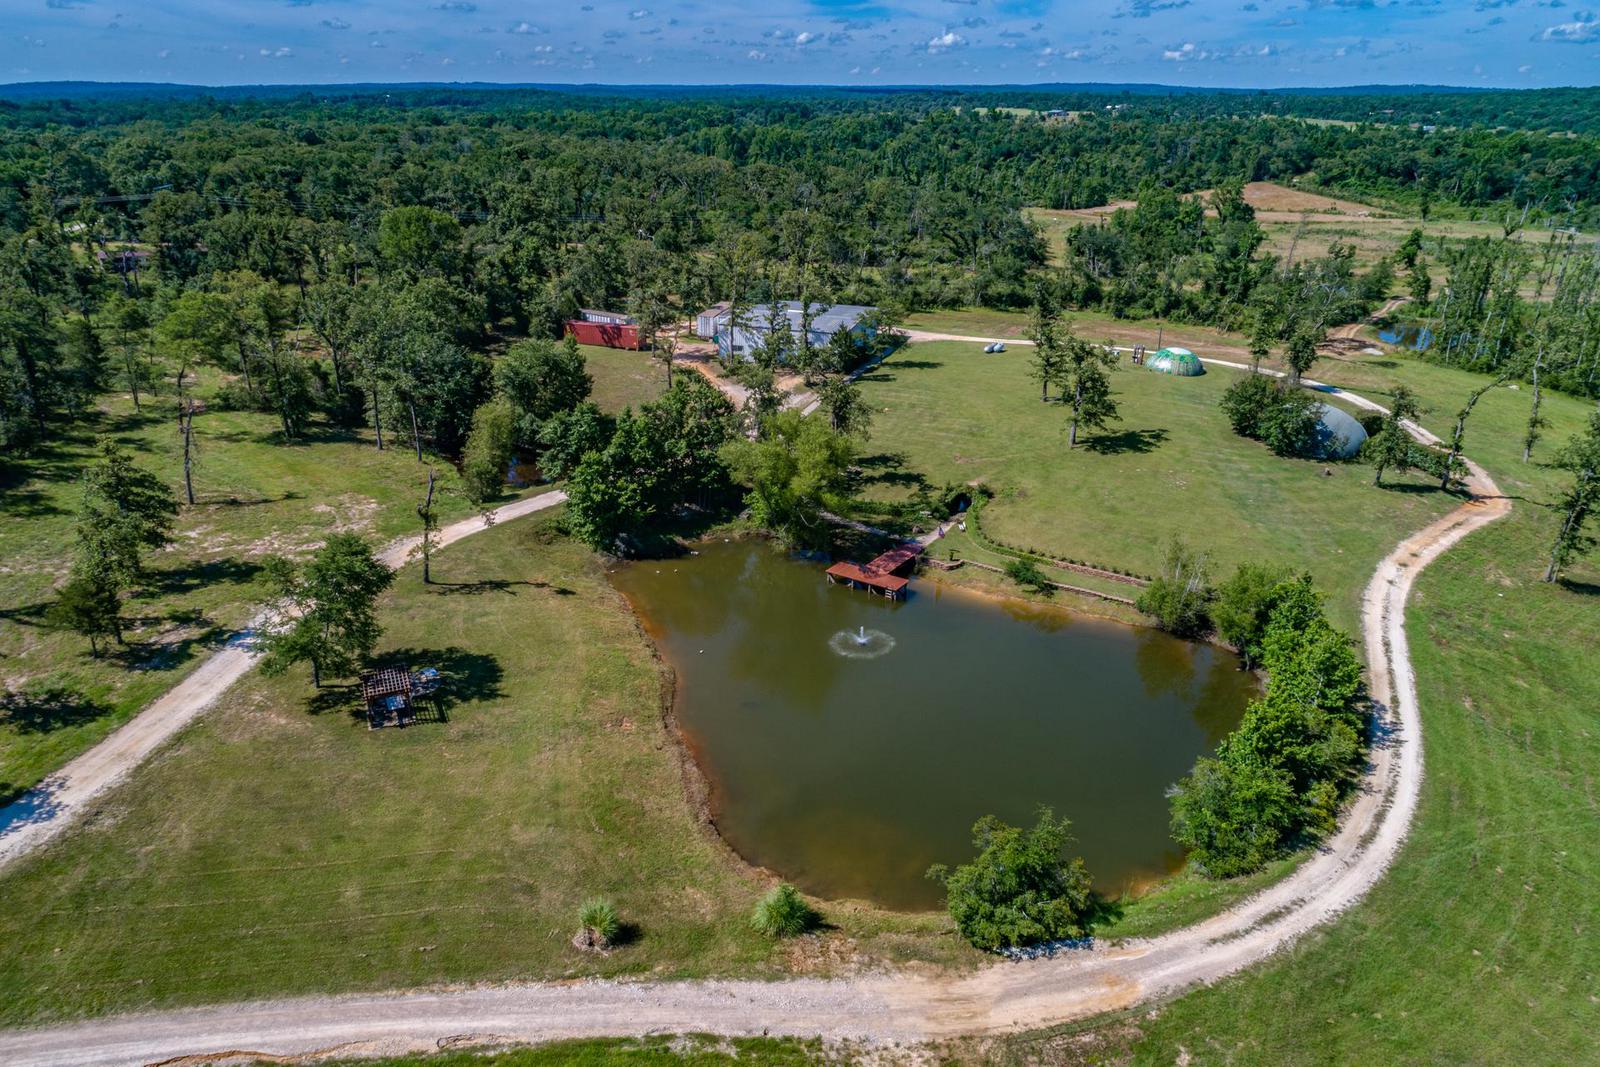 An An aerial view of the sprawling 40-acre property.